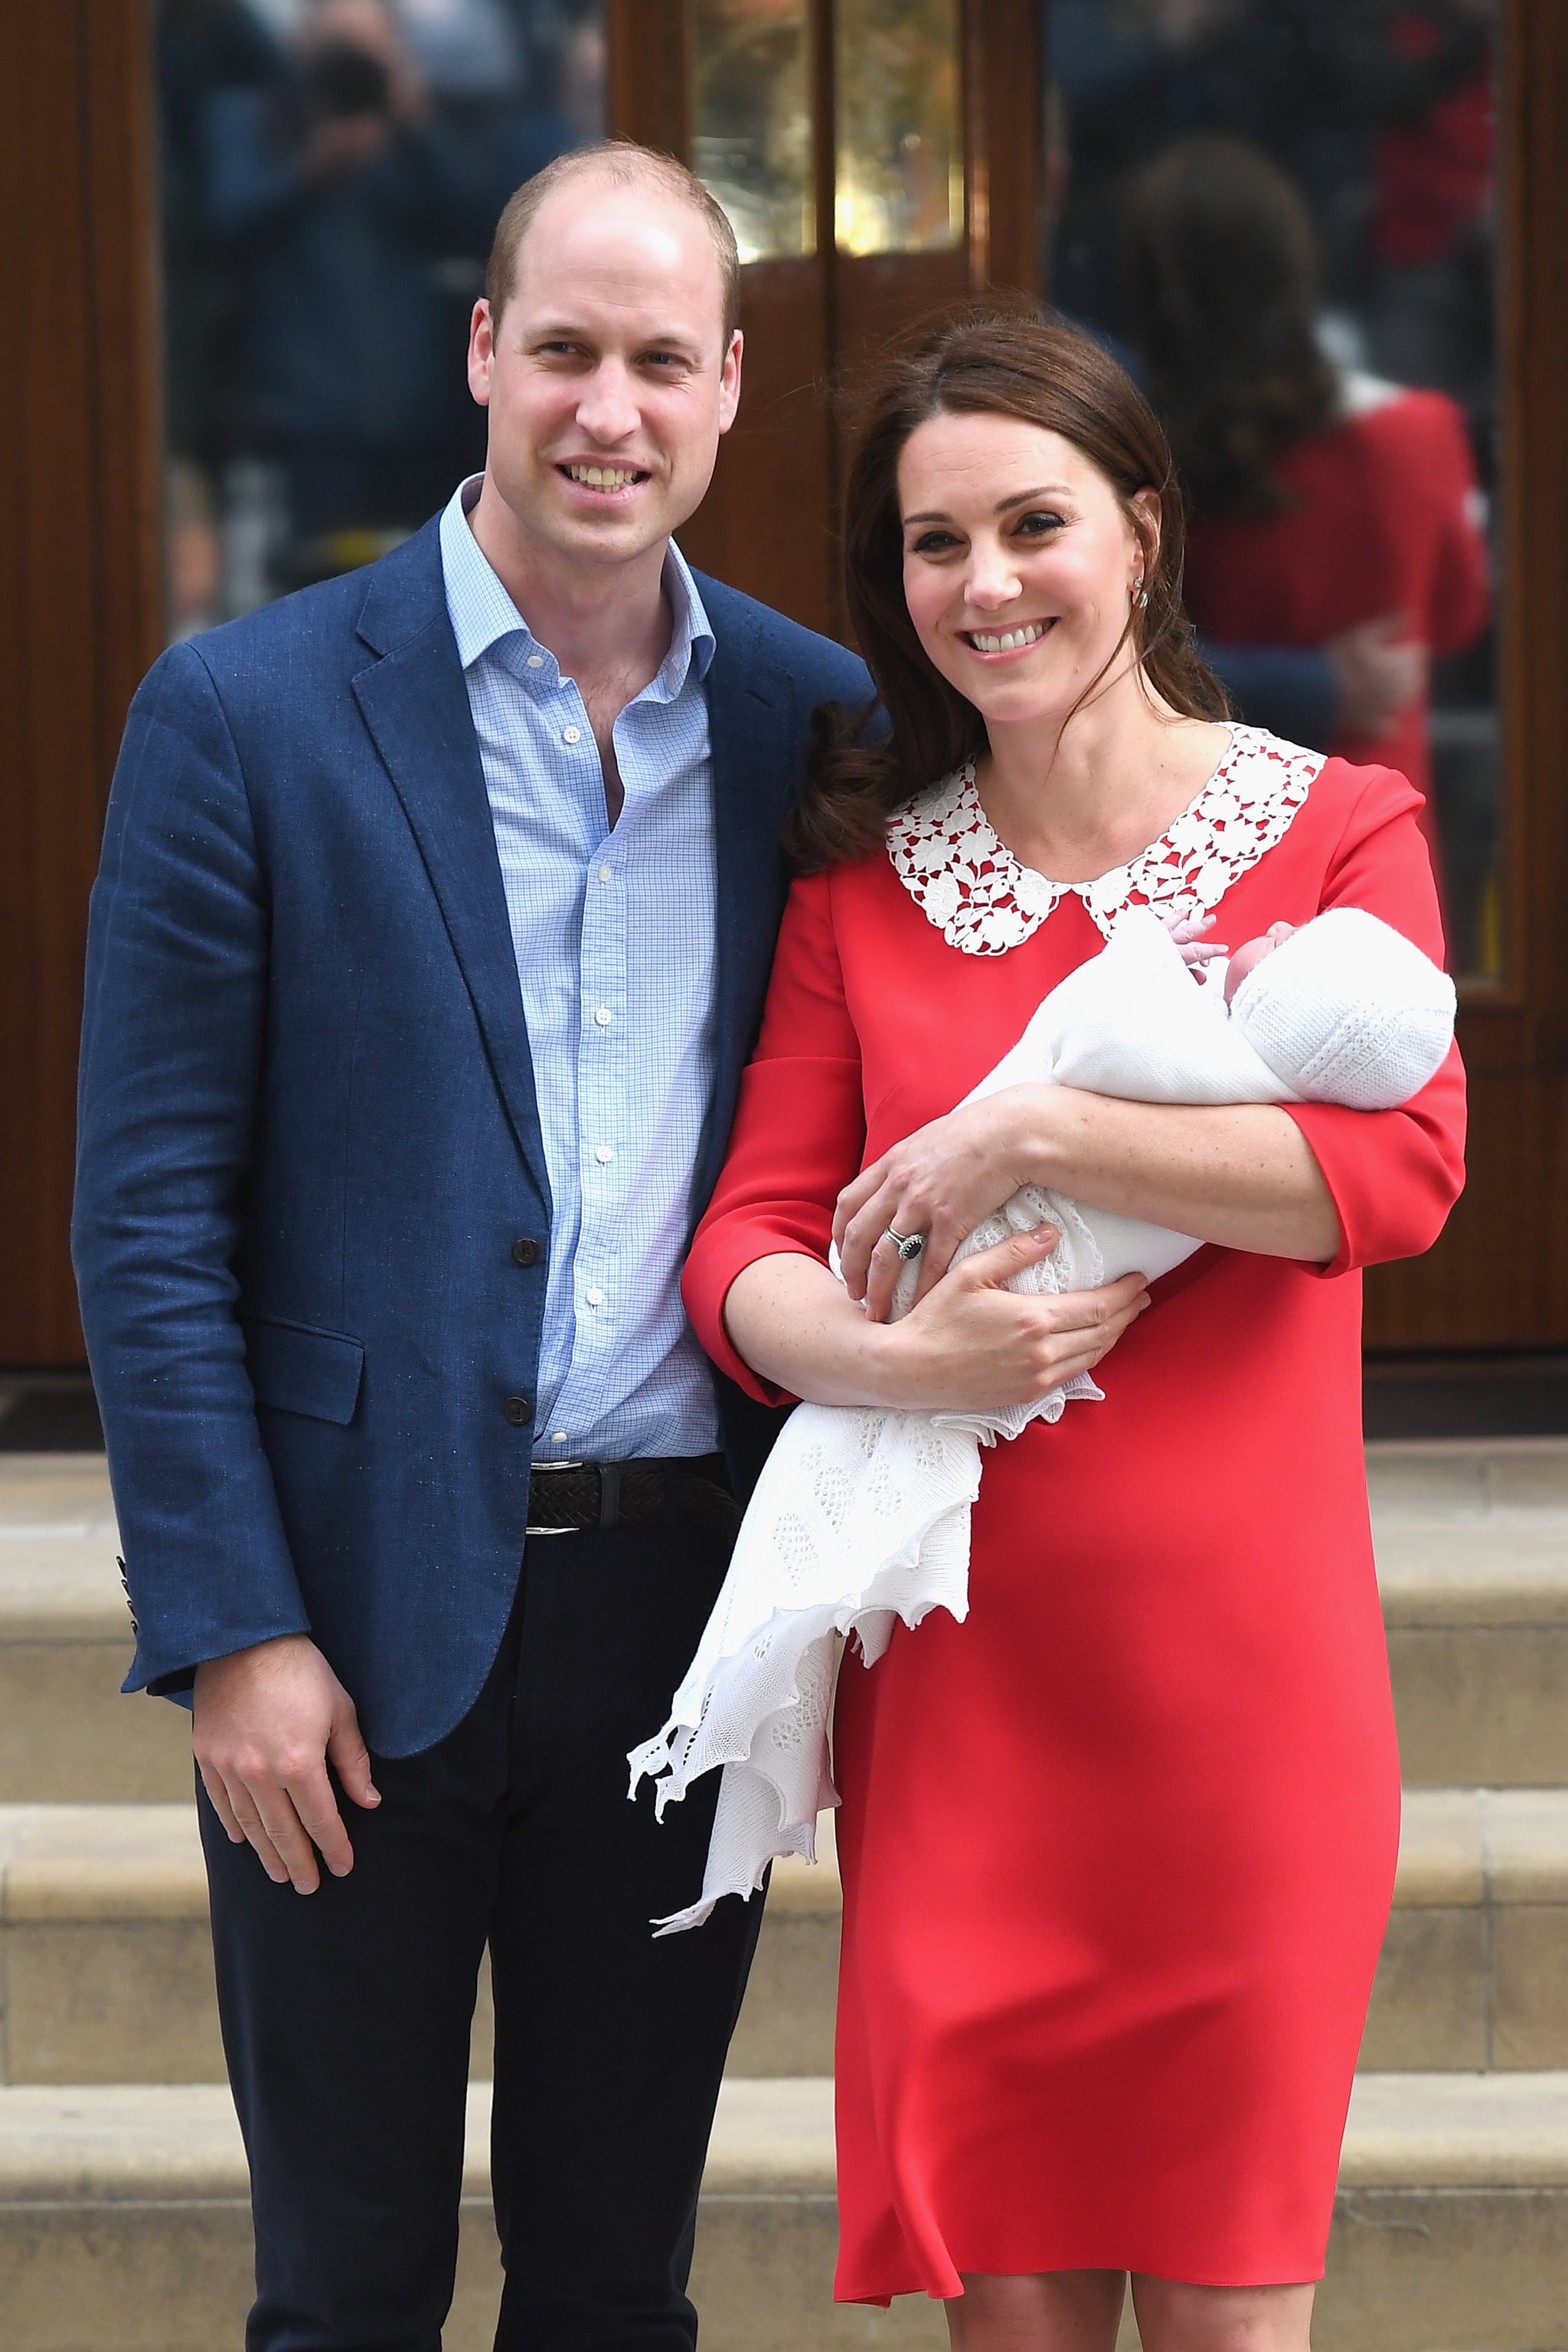 LONDON, ENGLAND - APRIL 23:  Catherine, Duchess of Cambridge and Prince William, Duke of Cambridge depart the Lindo Wing with their newborn son at St Mary's Hospital on April 23, 2018 in London, England. The Duchess safely delivered a son at 11:01 am, weighing 8lbs 7oz, who will be fifth in line to the throne.  (Photo by Karwai Tang/WireImage)